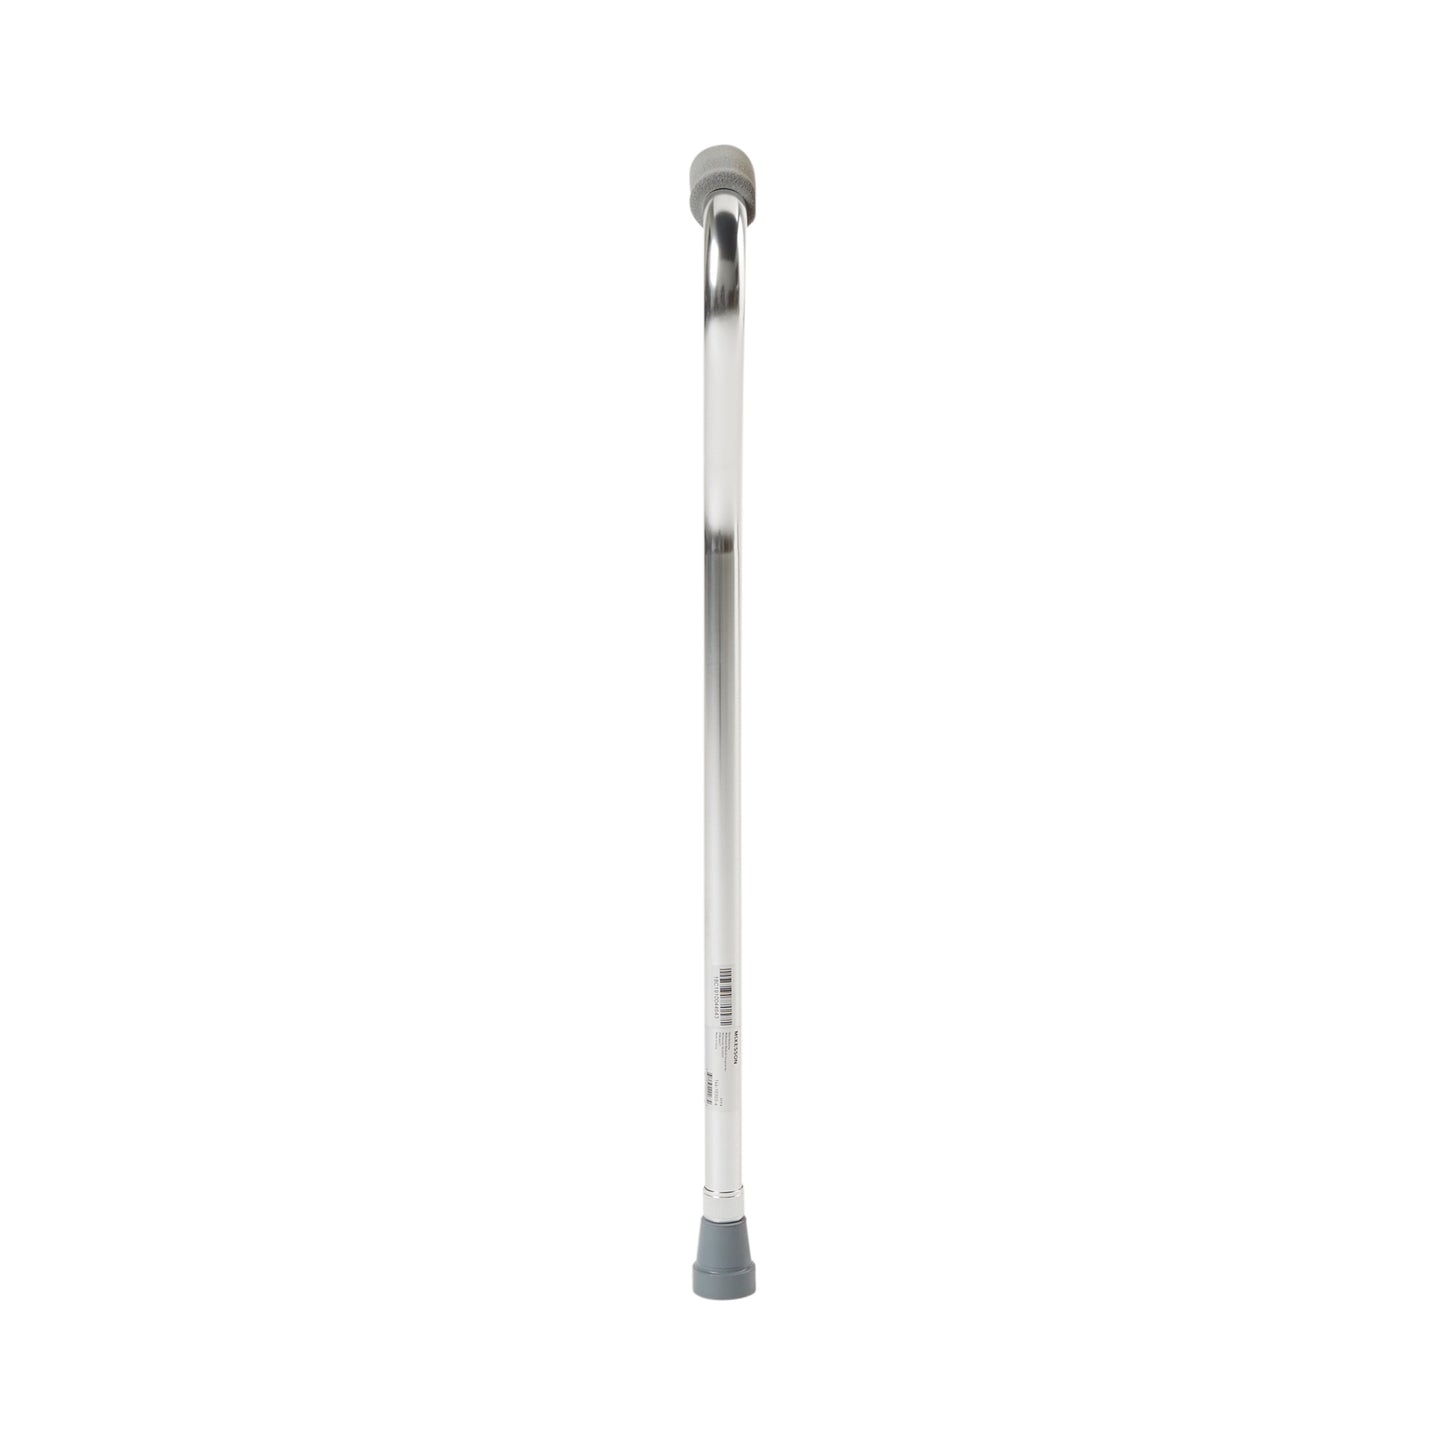 Mckesson Aluminum Silver Offset Cane, 30 – 39 Inch Height, Sold As 1/Each Mckesson 146-10303-6